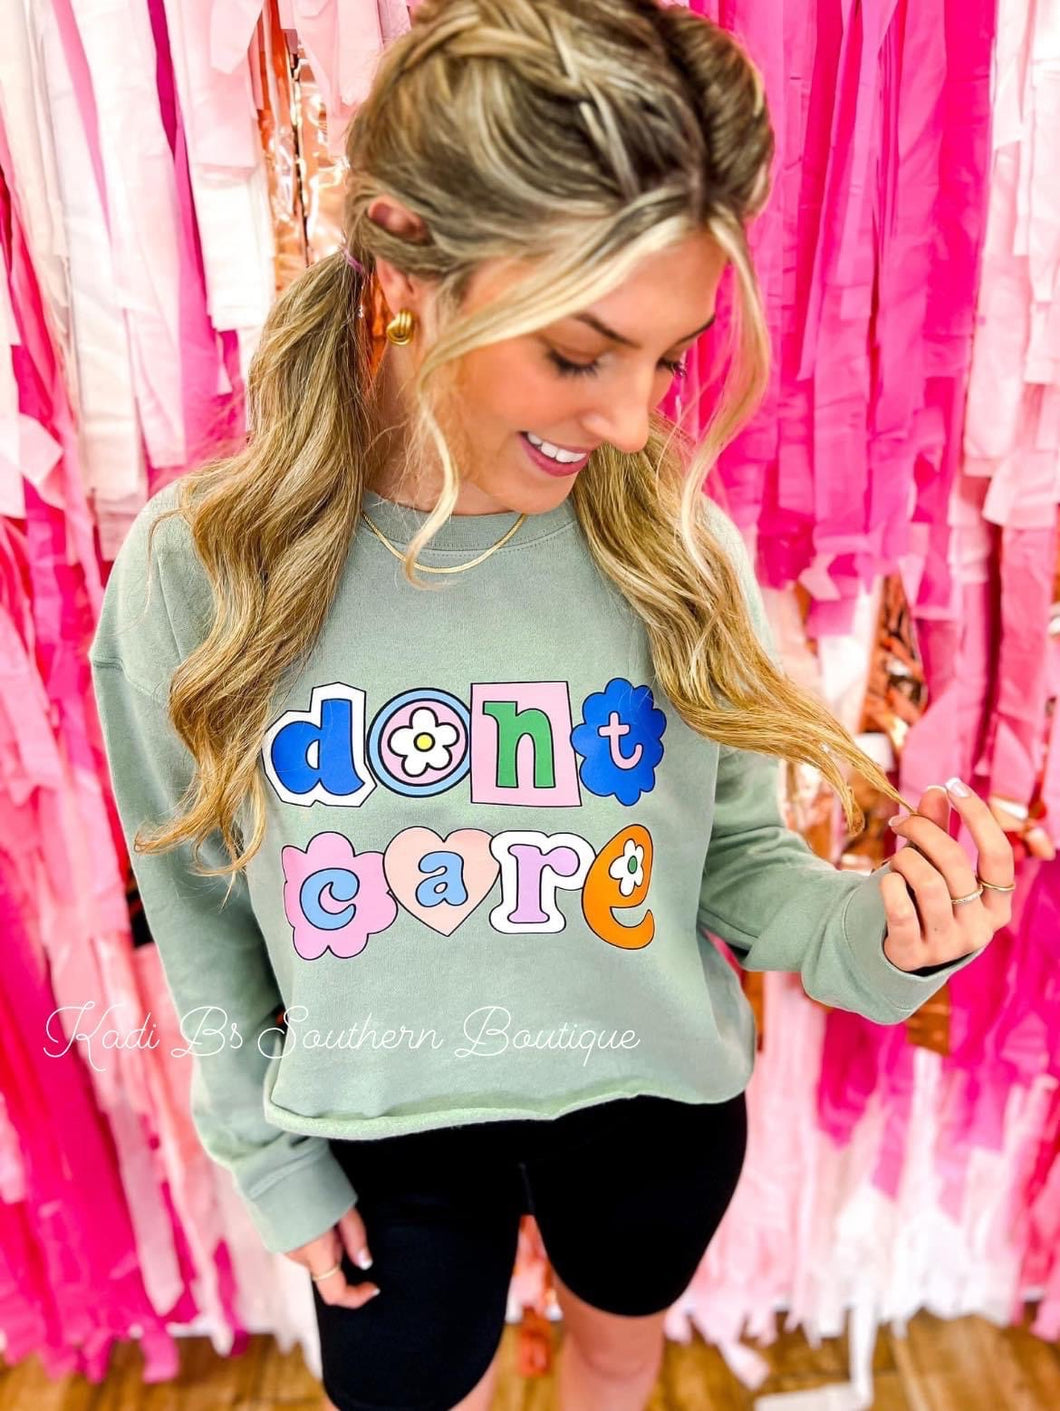 Don’t Care Cropped Sweatshirt